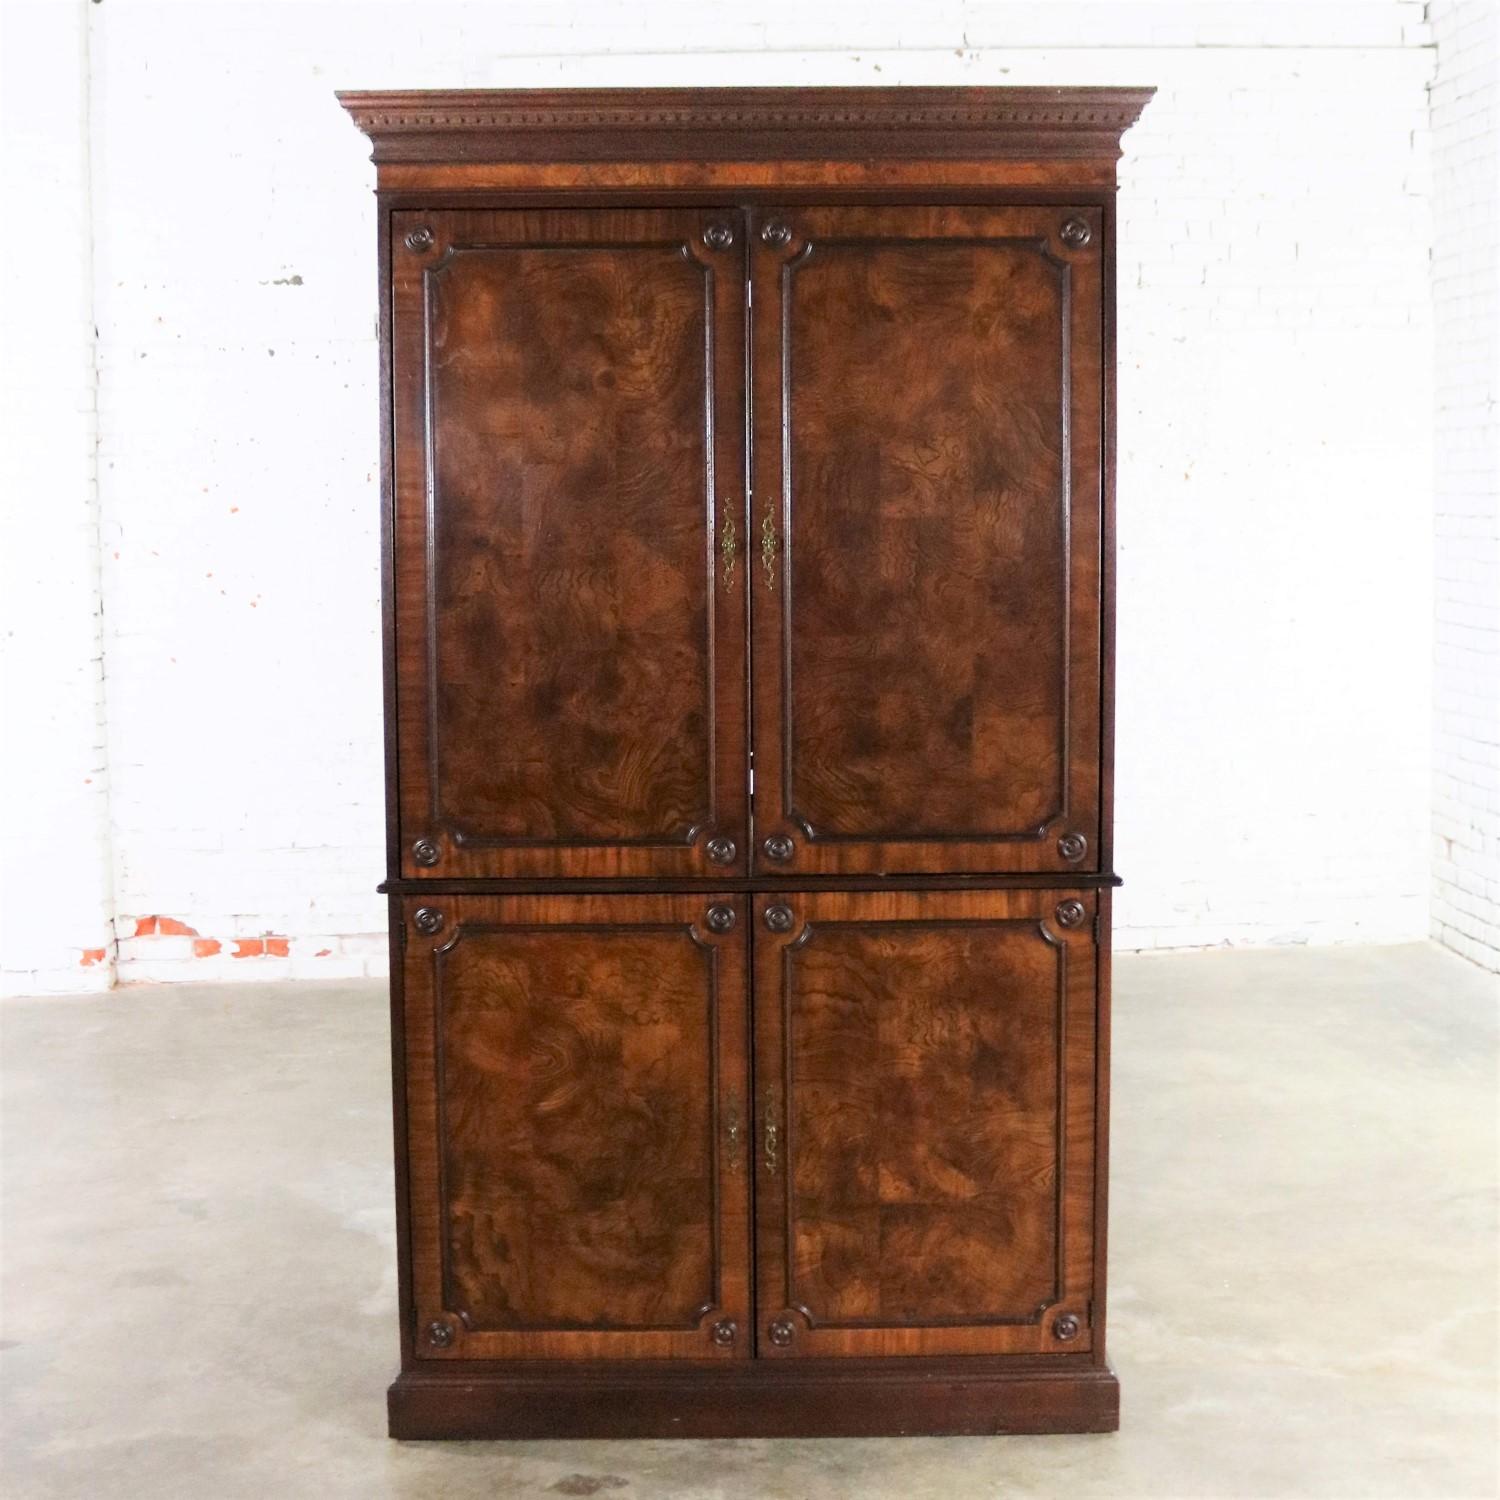 Handsome and stately large mahogany veneered entertainment armoire or wardrobe cabinet by Hekman Comfortable Living Furniture. This piece is in wonderful vintage condition but not without signs of use. There are nicks and dings that we feel only add